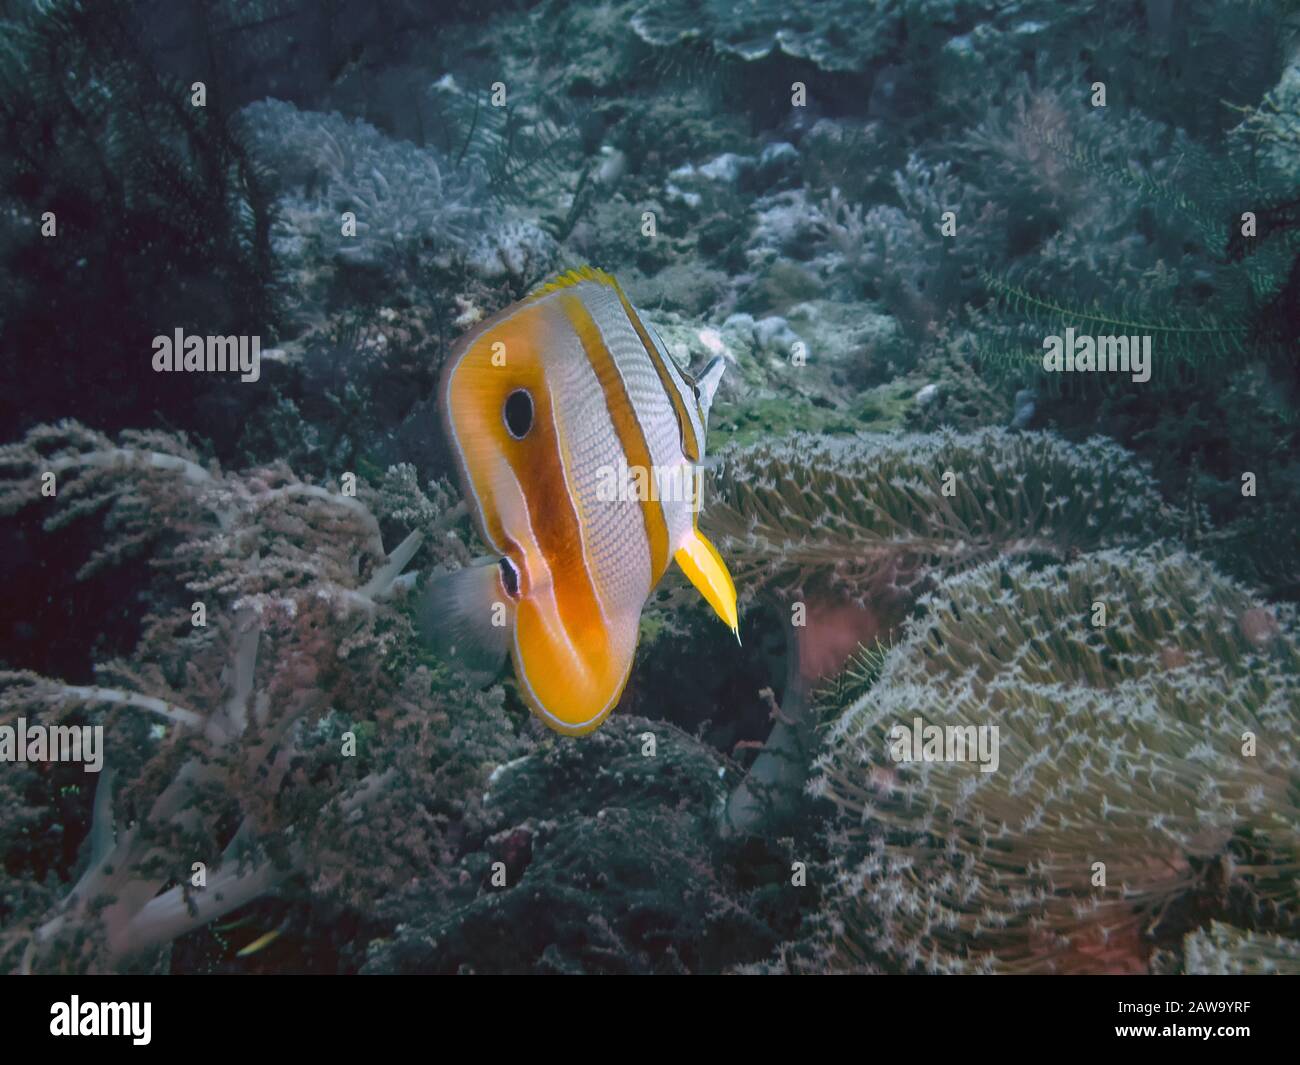 A Copperband Butterflyfish (Chelmon rostratus) Banque D'Images